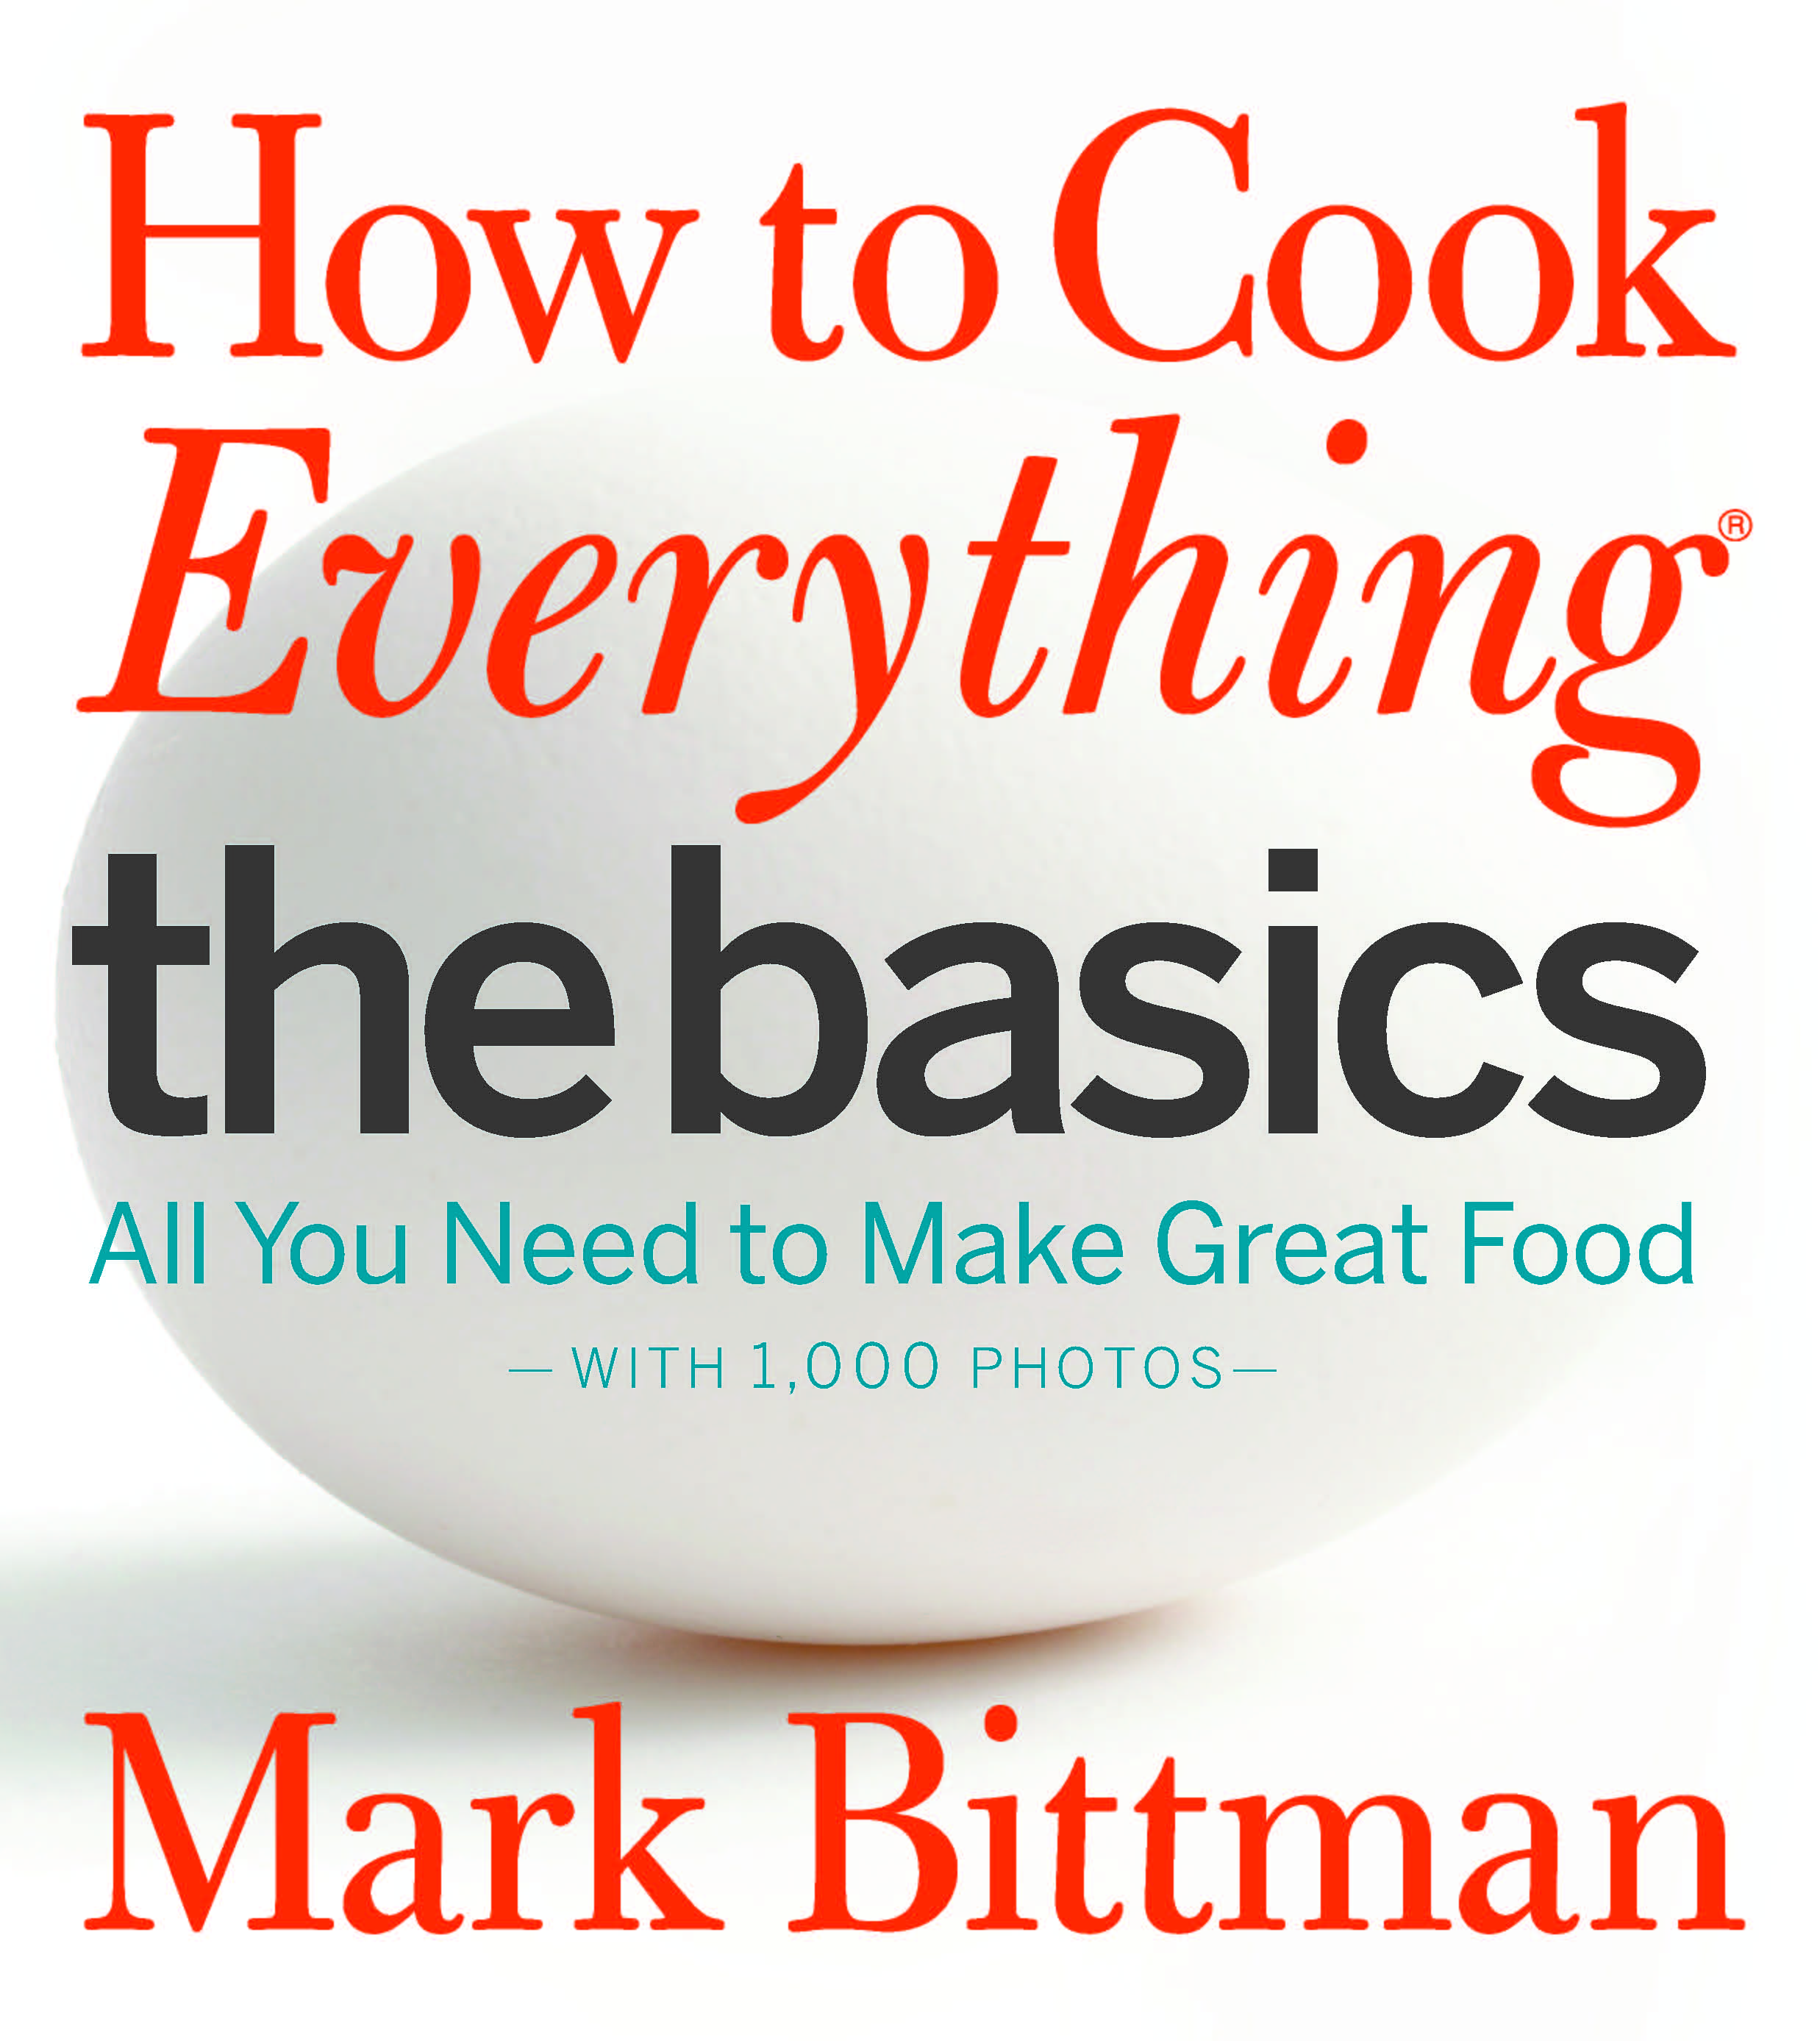 How to Cook Everything book